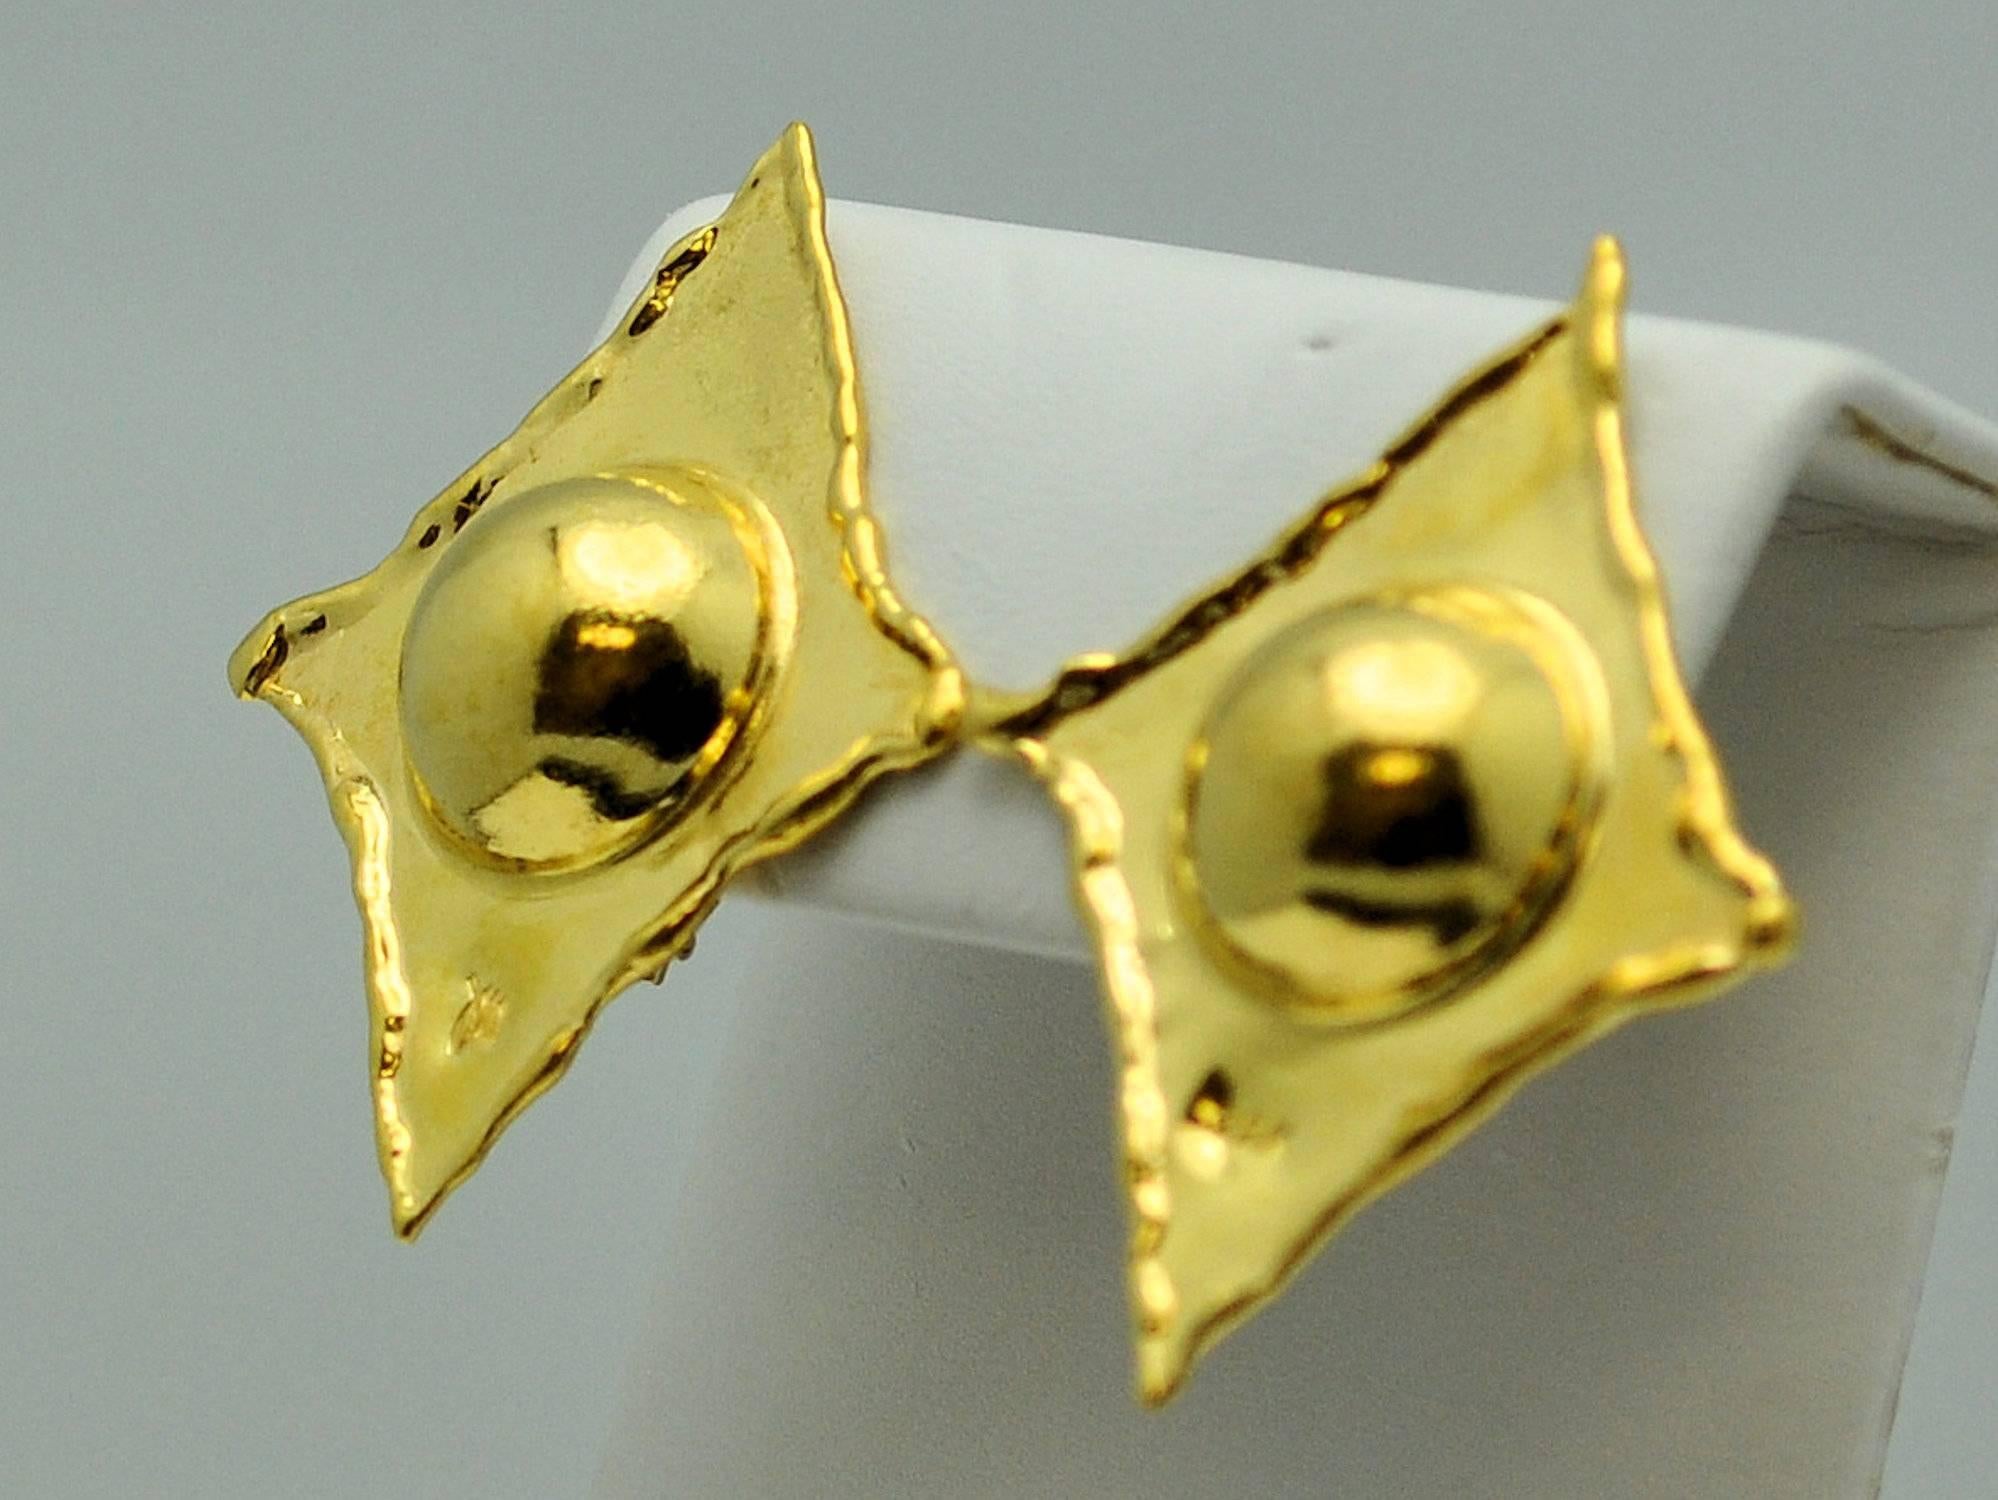 Diamond shape earrings with deep center dome, and detailed border in the trademark style of Jean Mahie.  Hand-wrought so that no two pieces are alike.  Clip back. Signed and gold mark on front of earrings. 